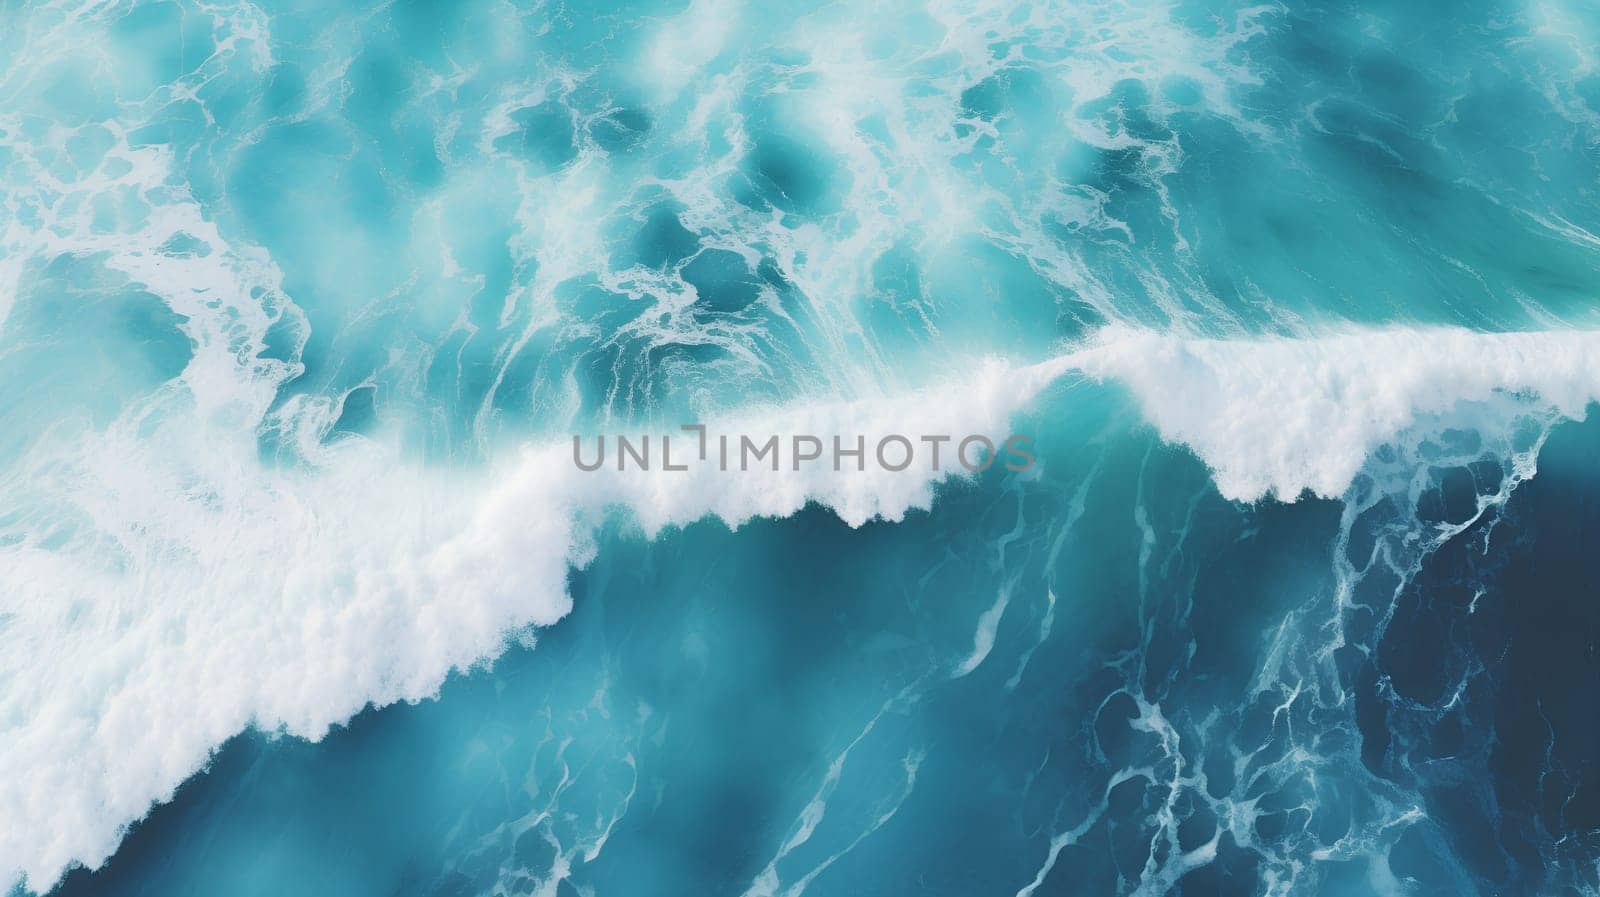 Aerial view of a turquoise ocean wave cresting with white foam against deep blue water. High quality photo